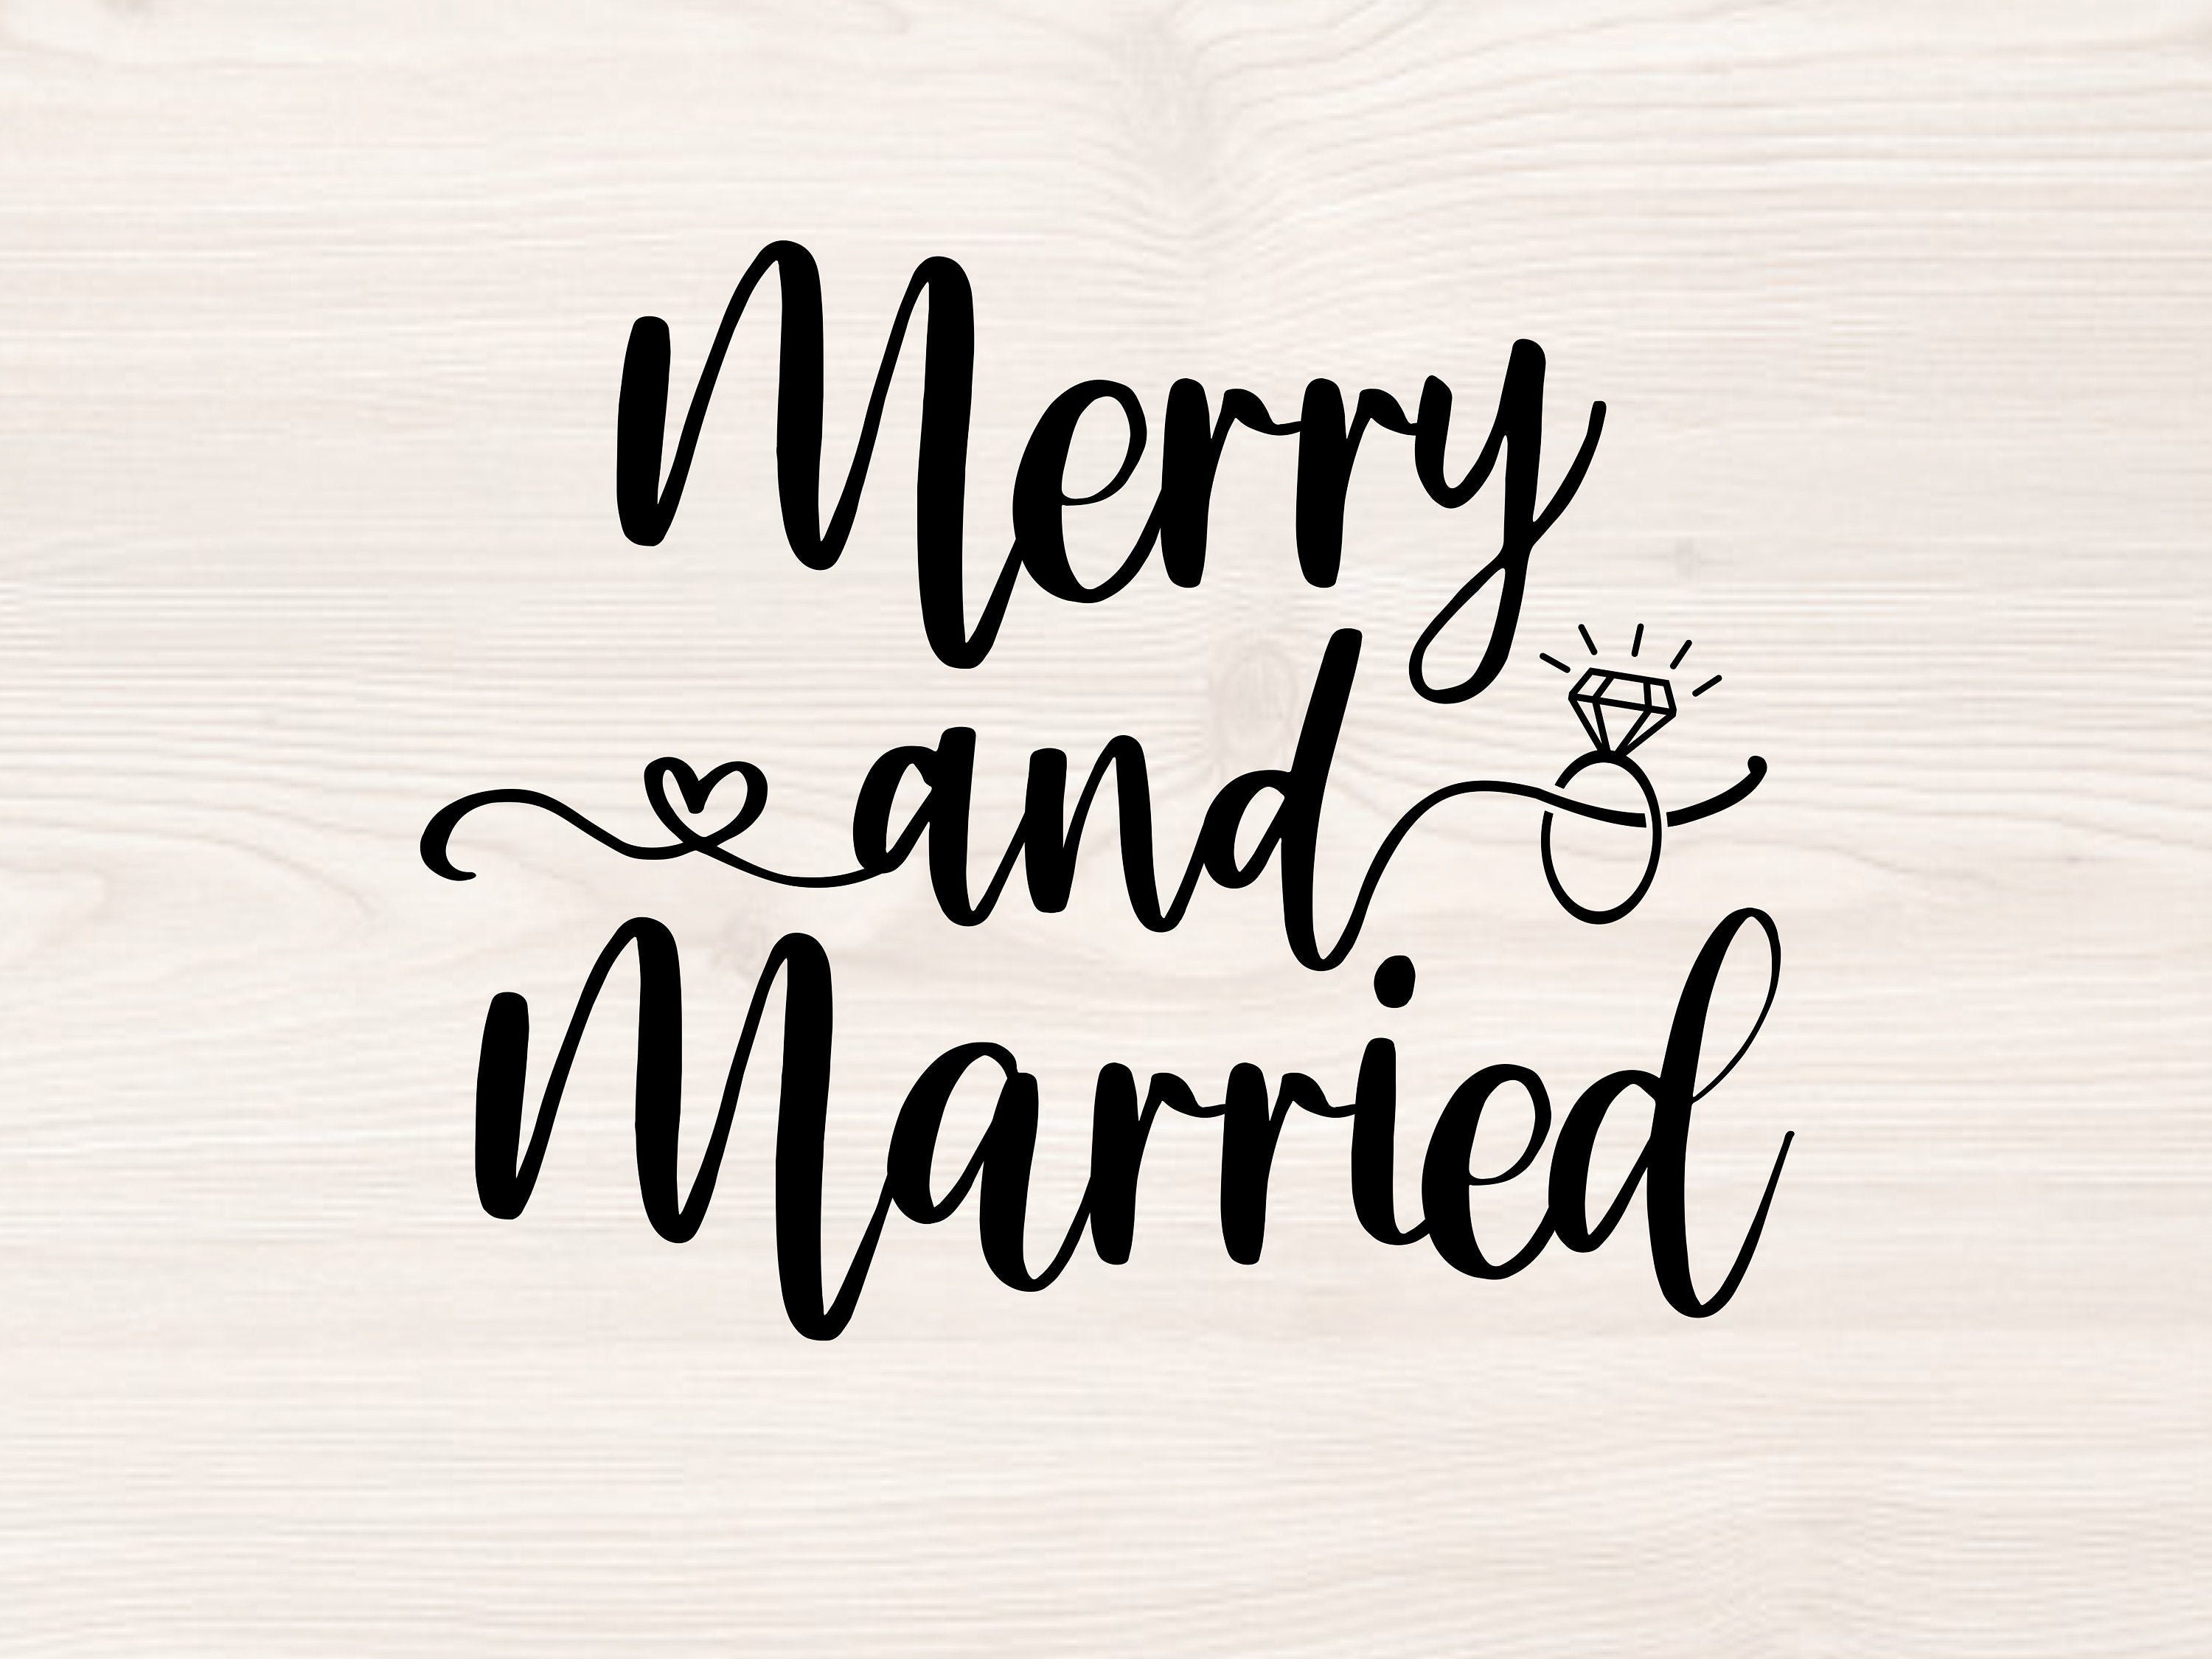 Merry and married SVG PNG Files for cutting machines, digital clipart, our first Christmas married as mr. and mrs.  Newlyweds